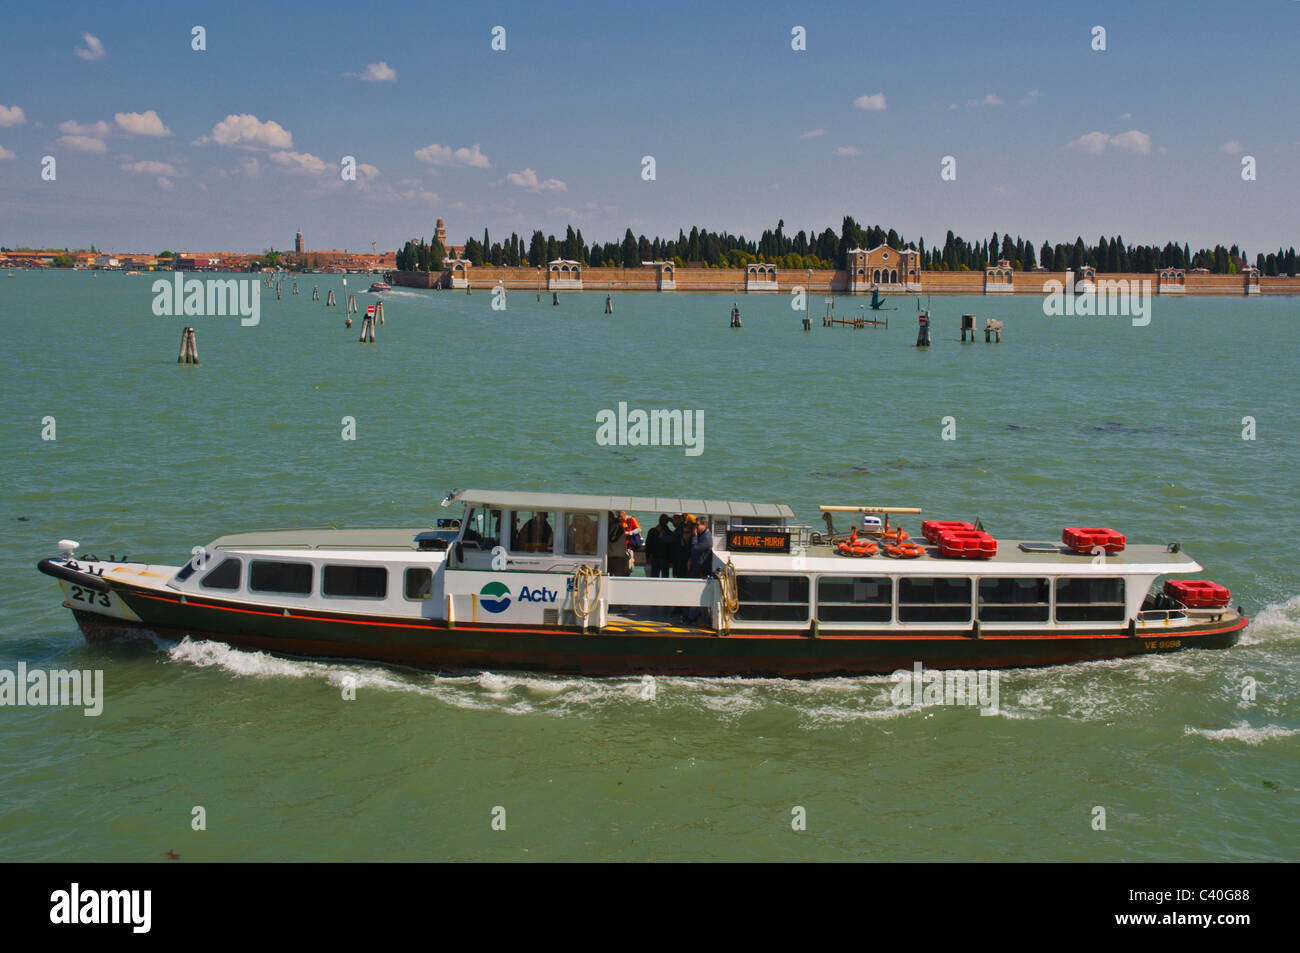 Vaporetti water bus in front of San Michele cemetery island Venice Italy Europe Stock Photo